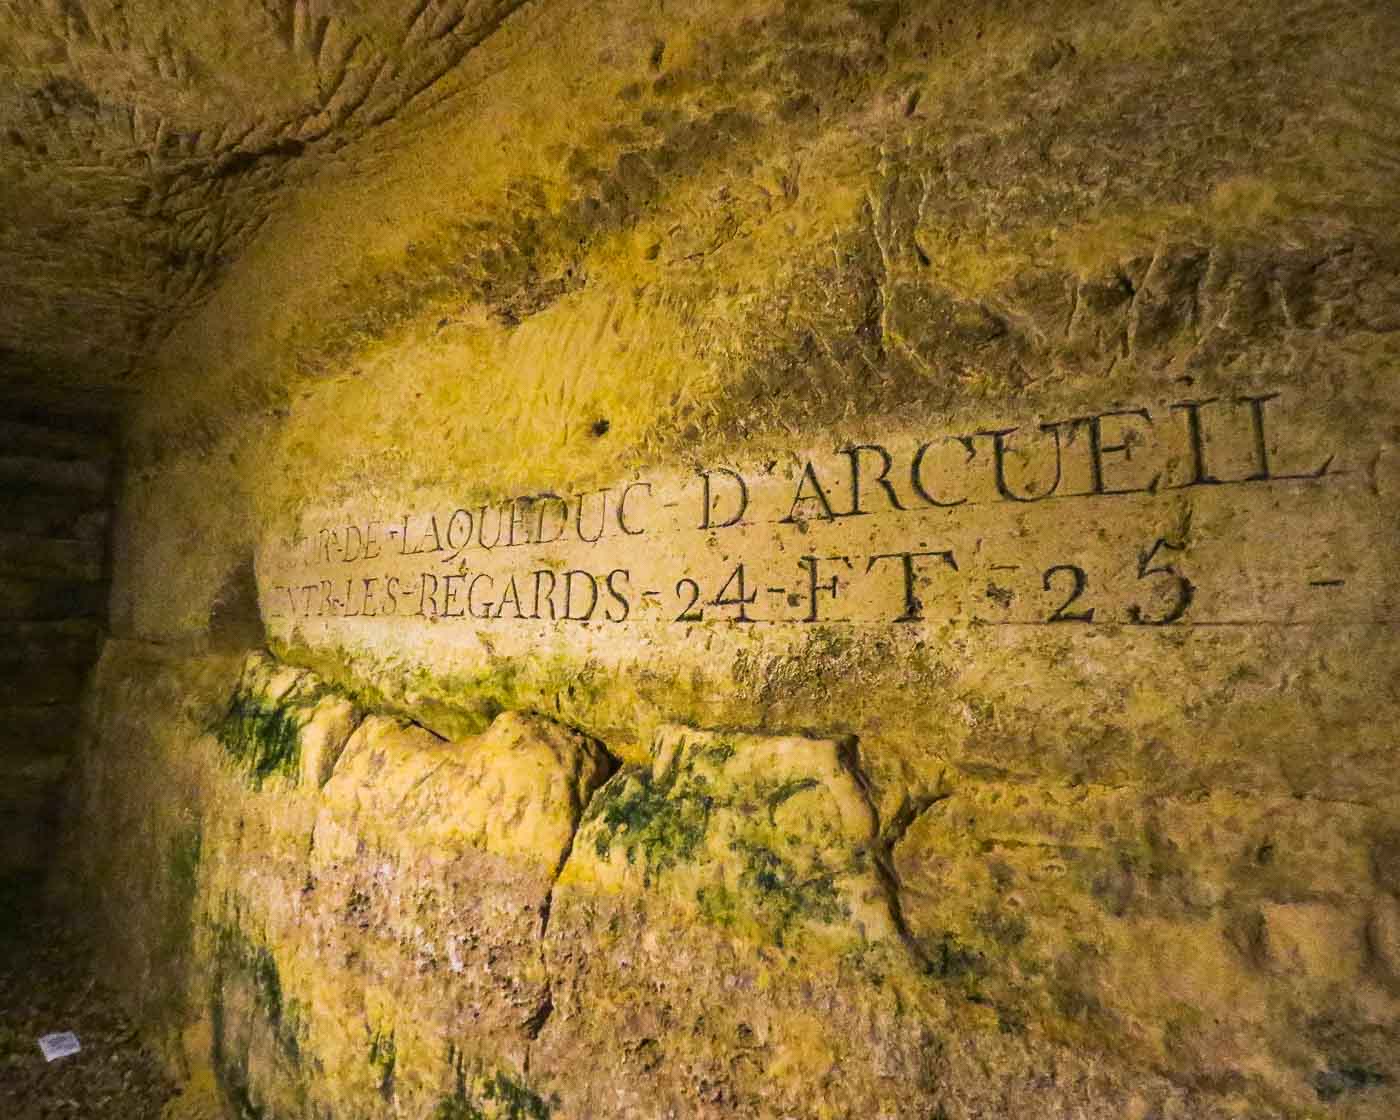 Under the romantic streets of Paris lies a world of darkness filled with the skeletal remains of millions of people. The Paris Catacombs hold a strange appeal, drawing those fascinated by the macabre and off-the-beaten-path history. 